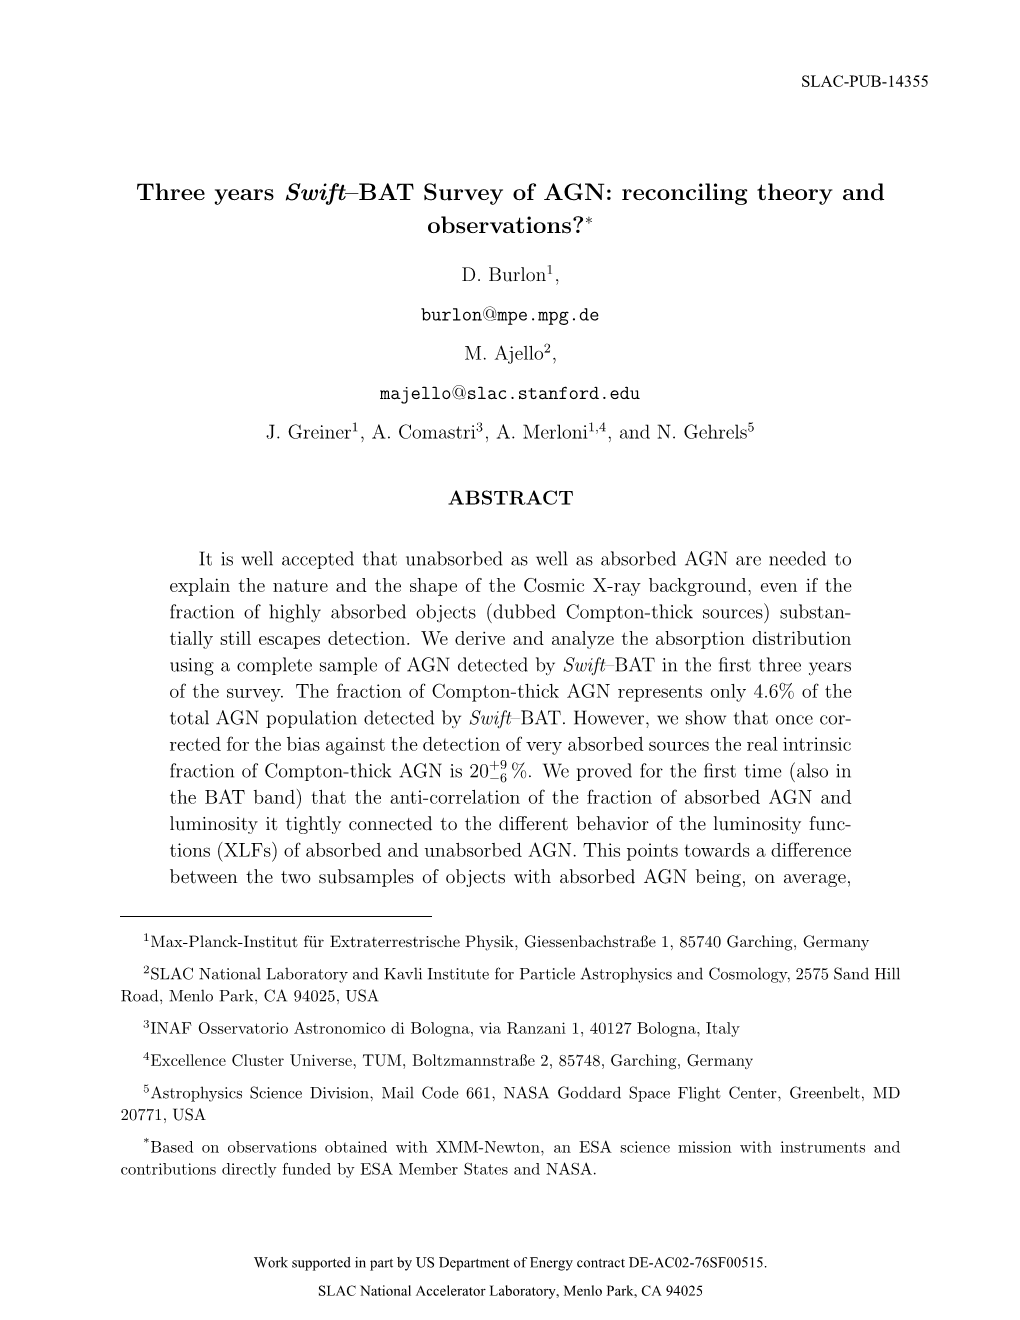 Three Years Swift–BAT Survey of AGN: Reconciling Theory and Observations?∗